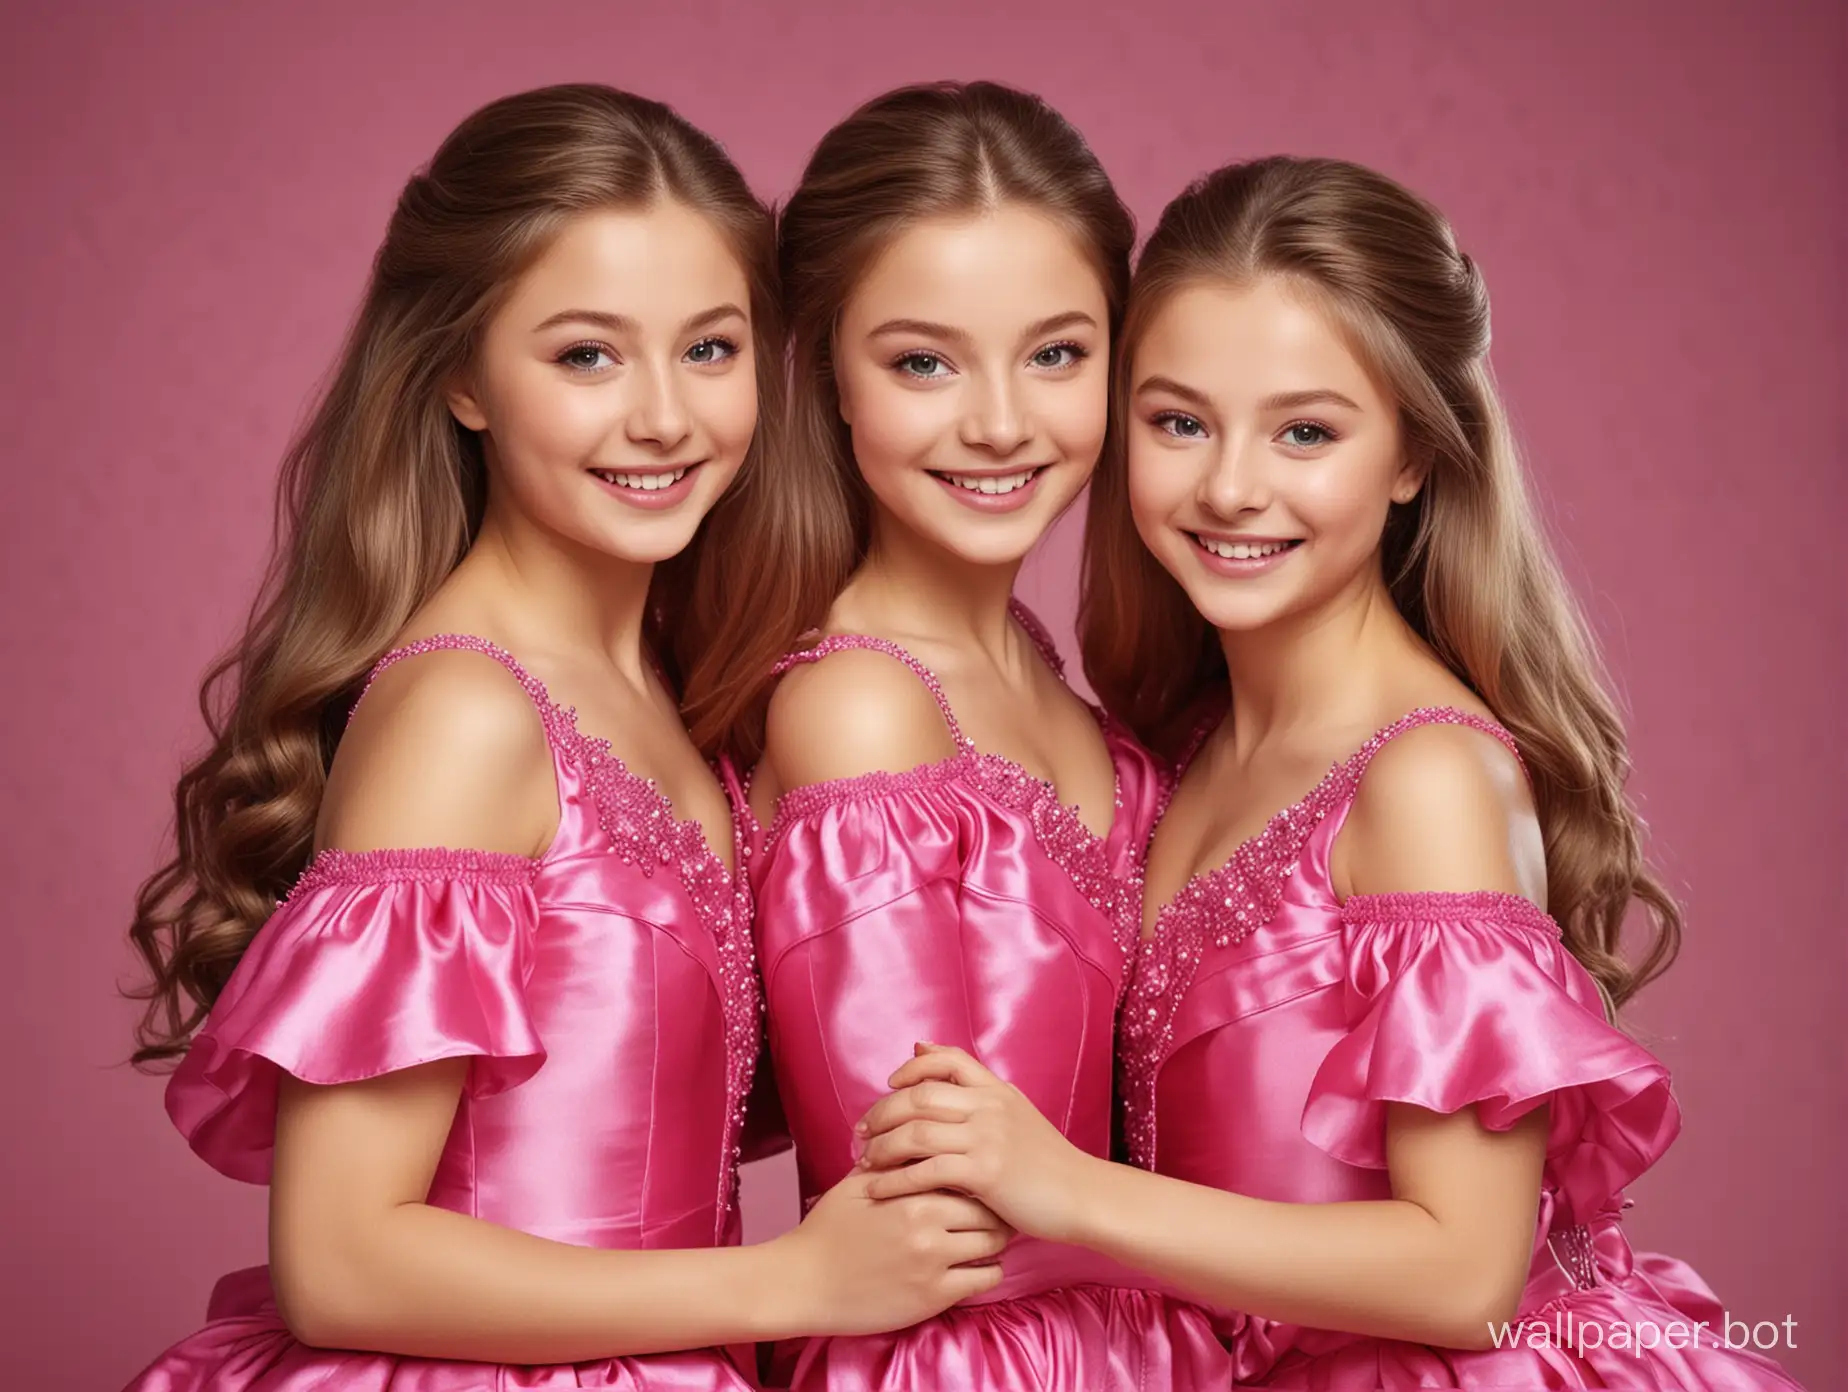 Twins-Embracing-in-Pink-Fuchsia-Silk-Dresses-with-Radiant-Smiles